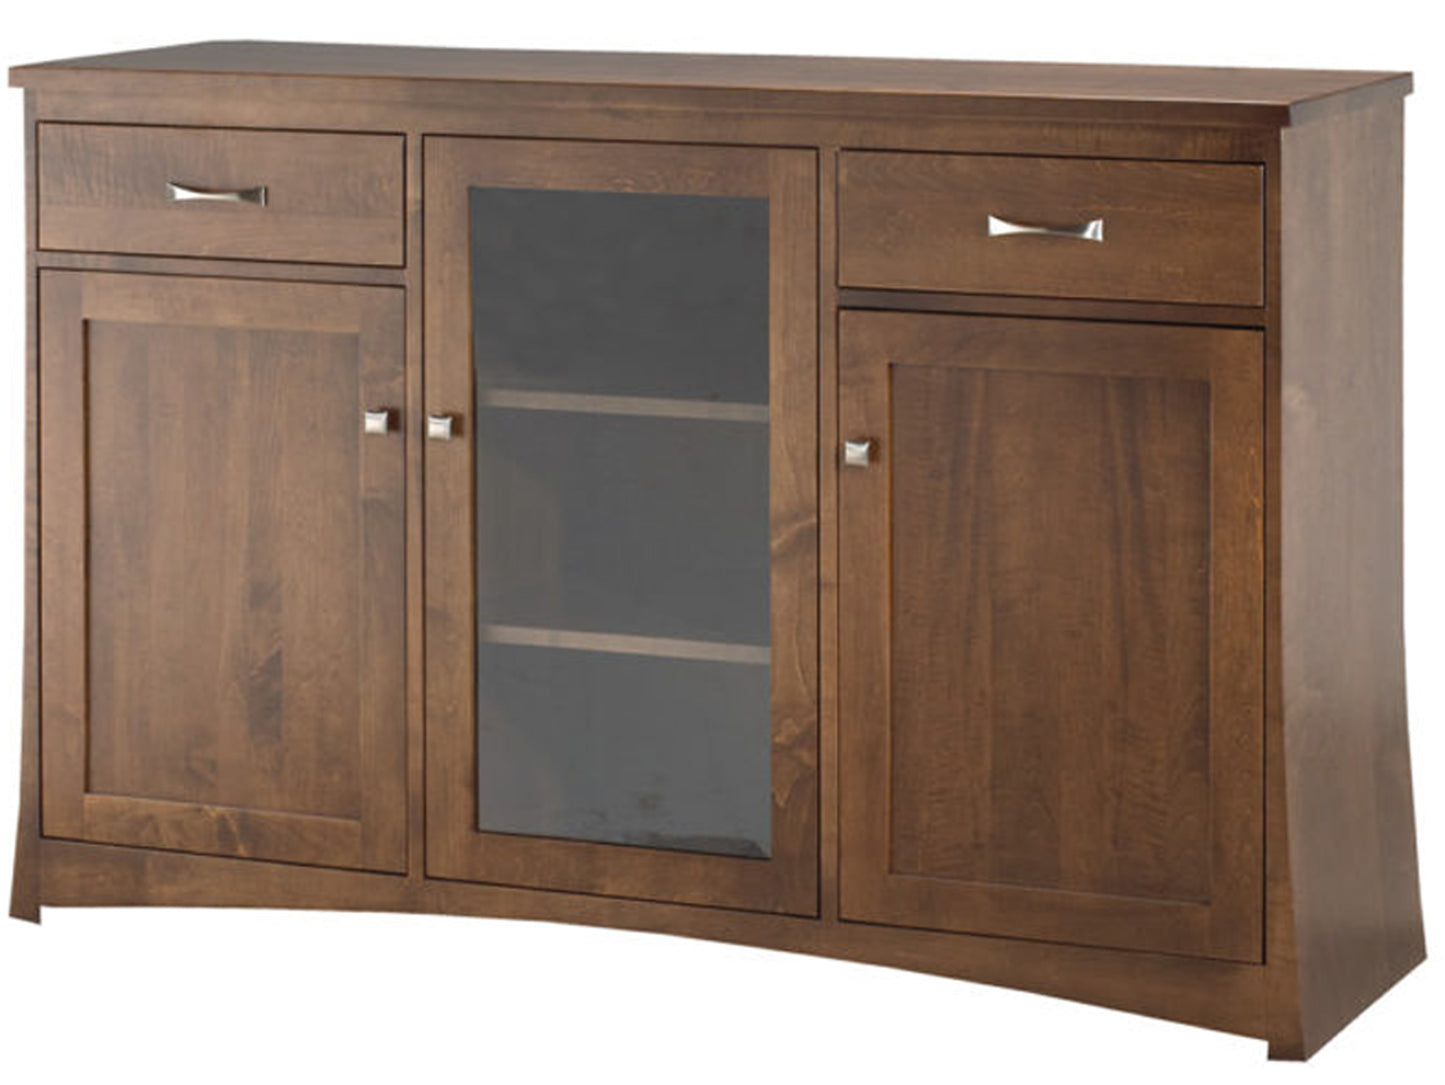 Madison sideboard - solid wood, Canadian made, custom made to order furniture|